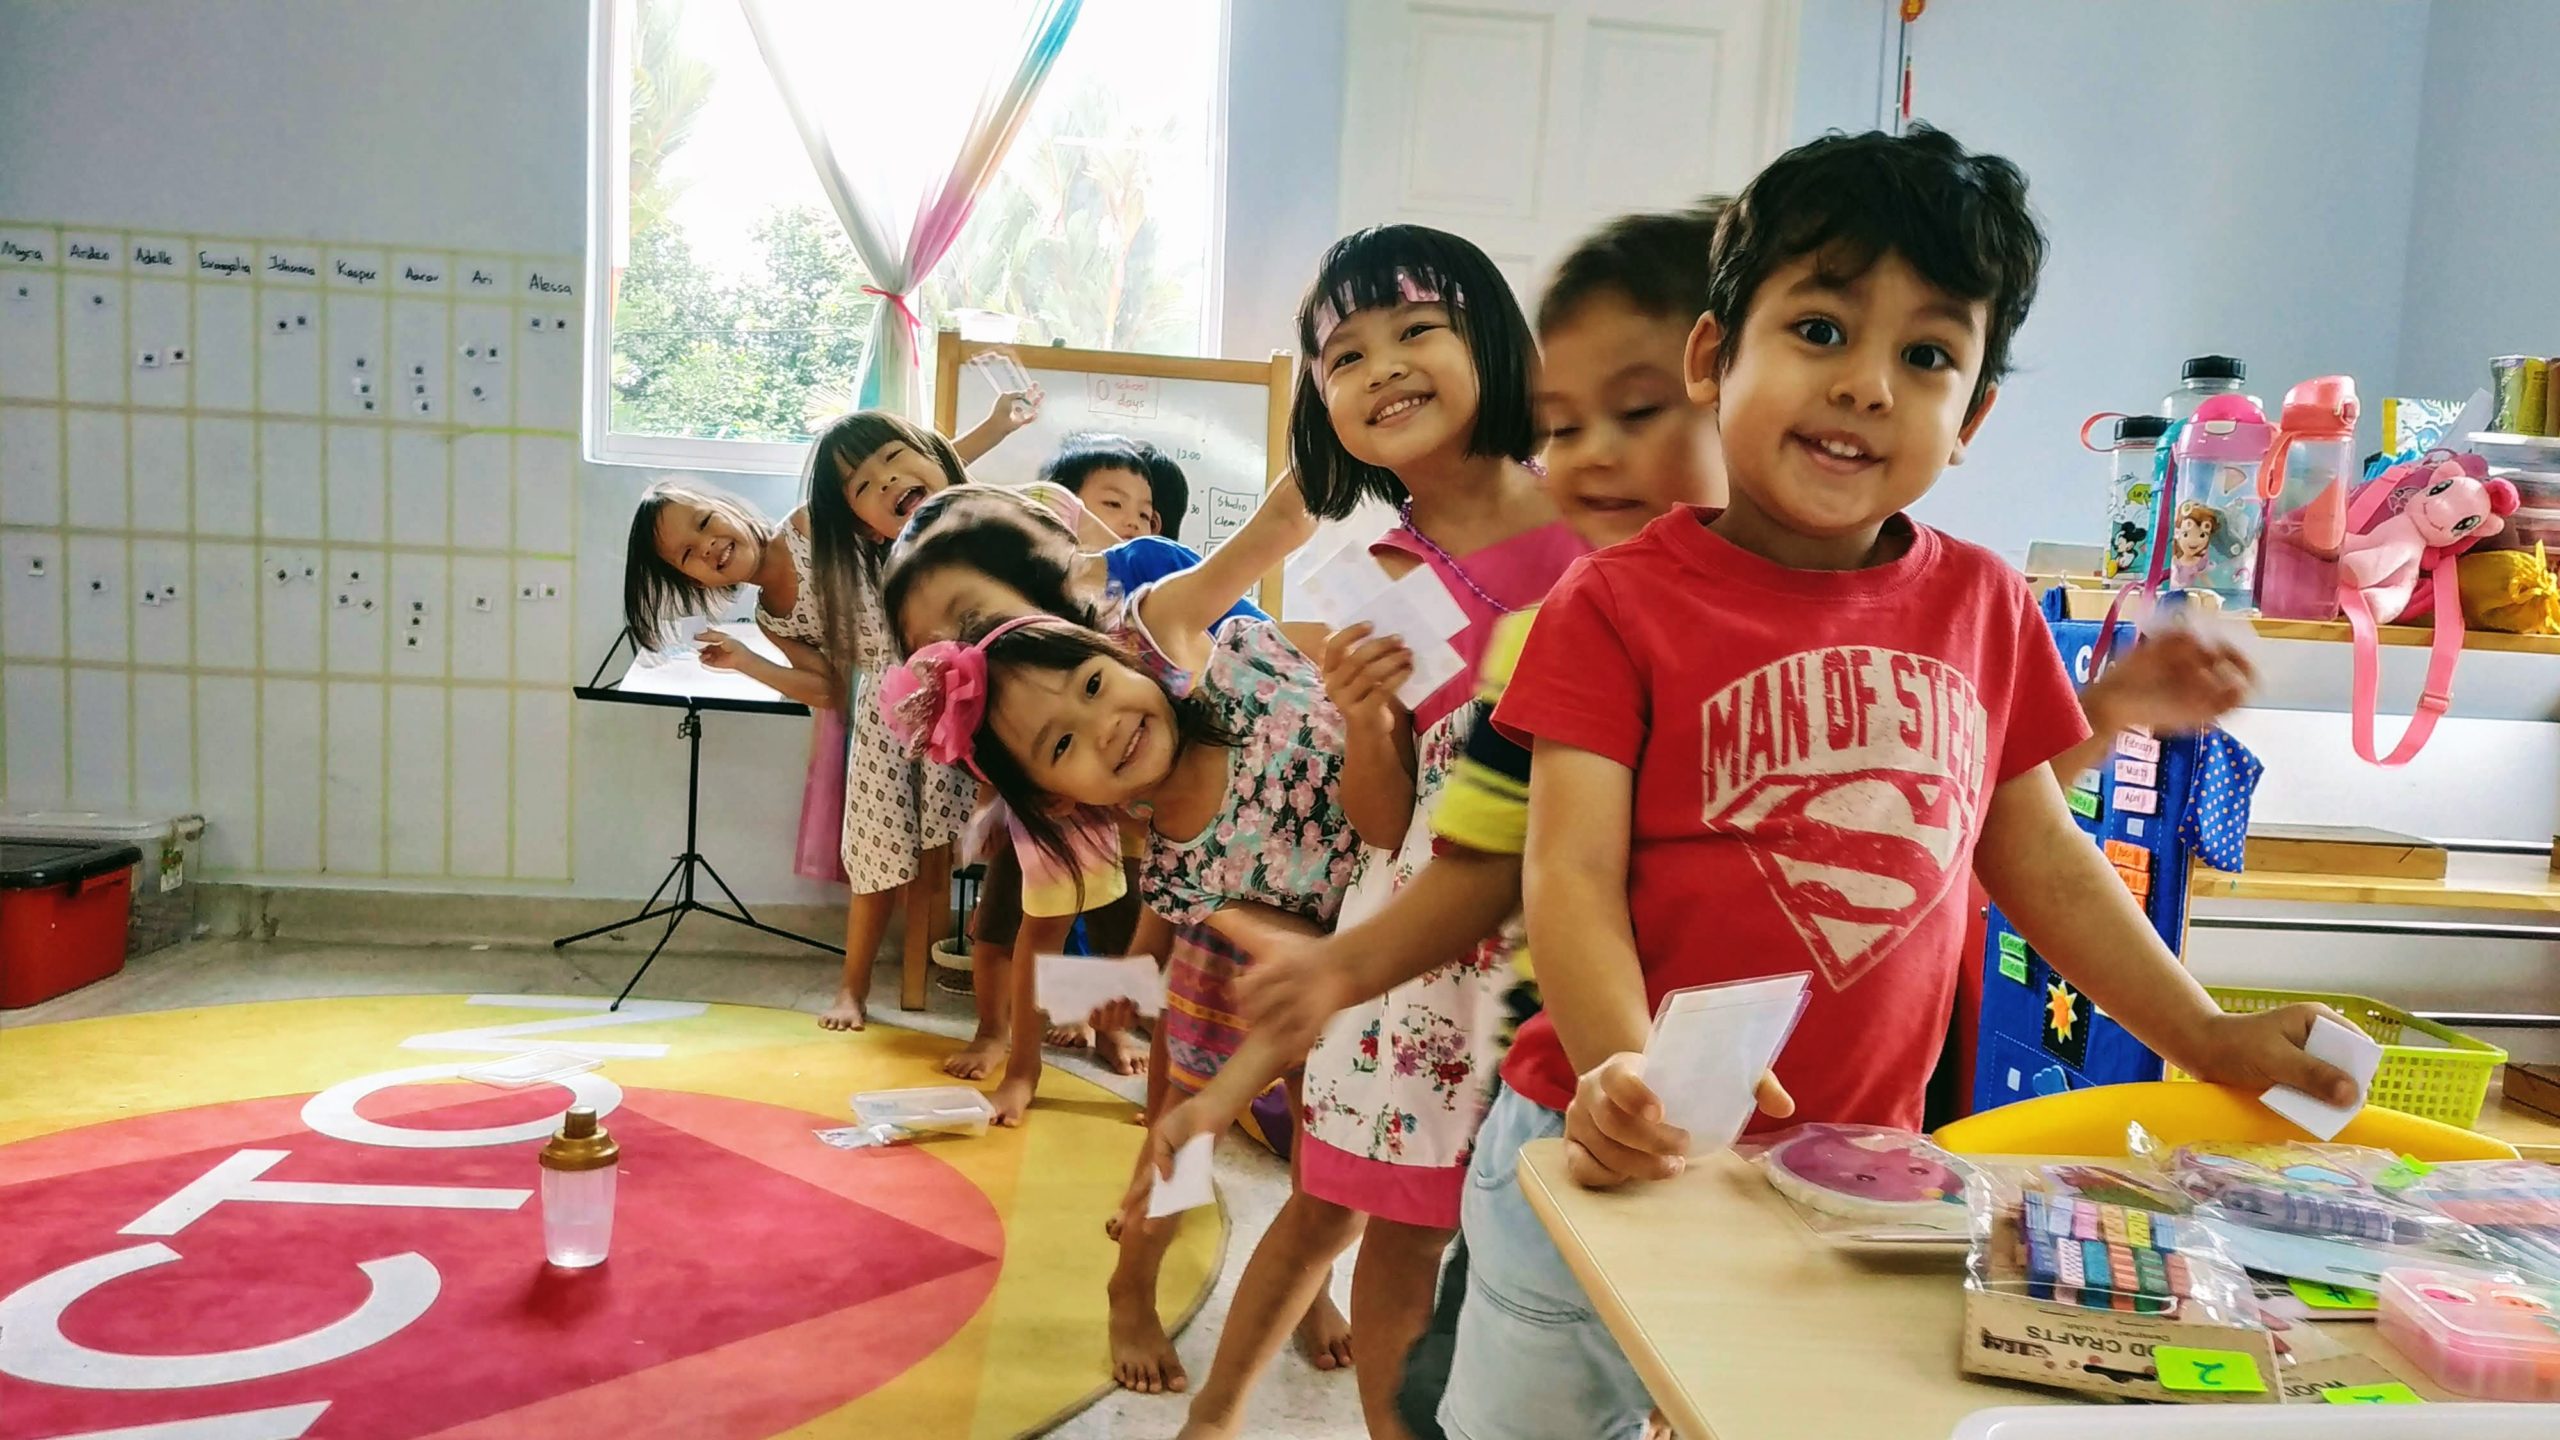 Preschool - Safe, caring, and warm environment where young children thrive